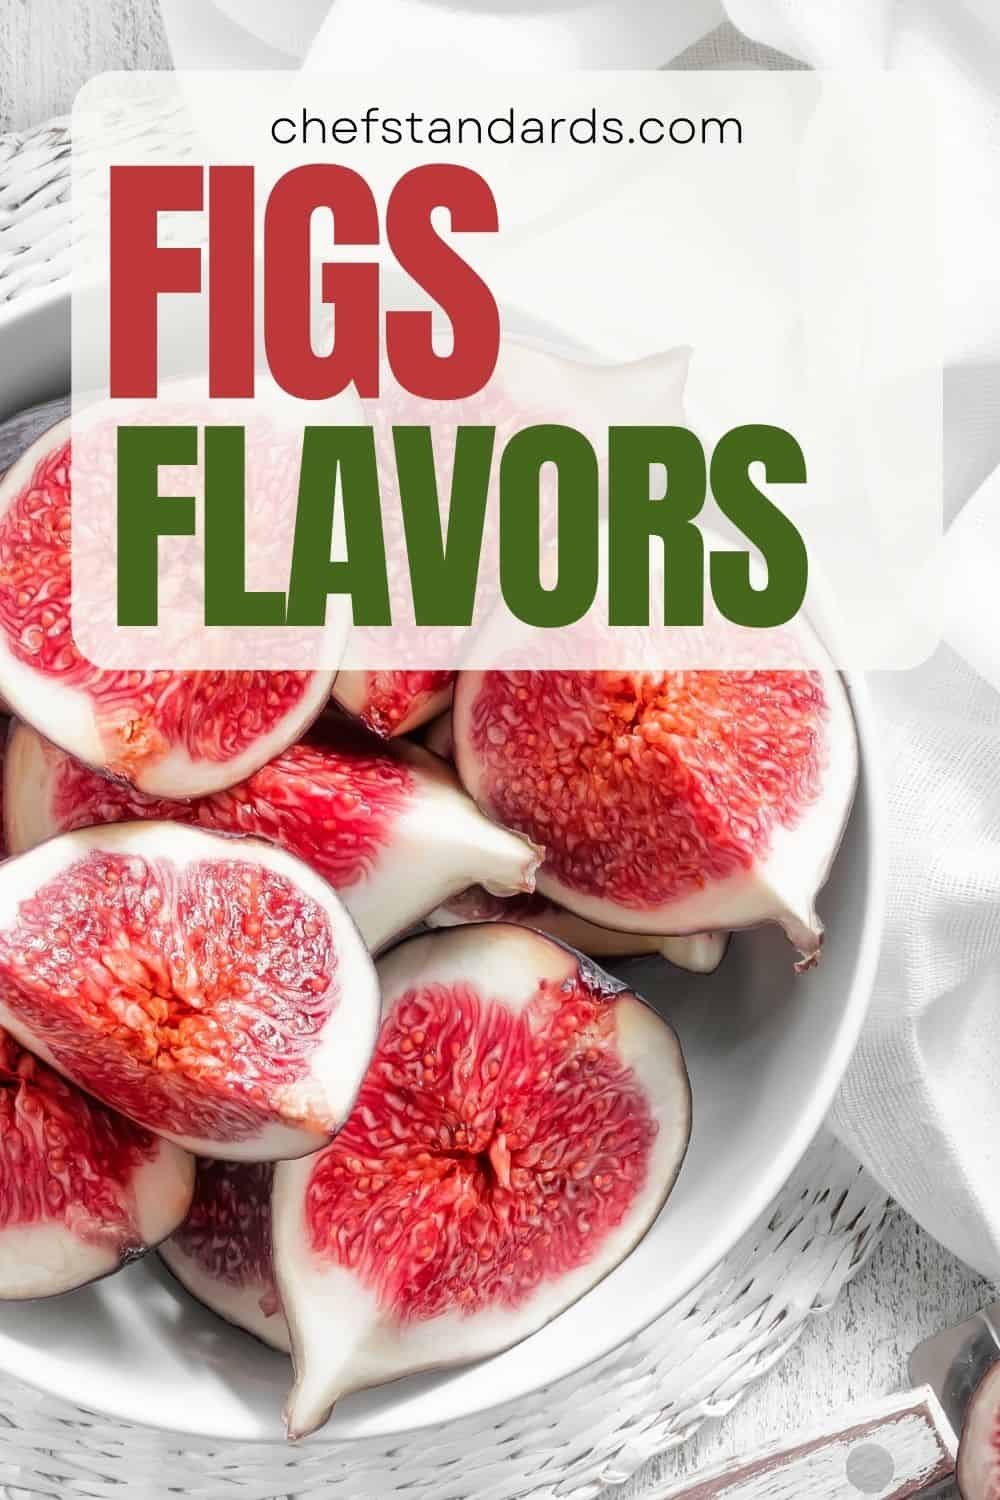 What Do Figs Taste Like? The Sweetest Flower Flavors